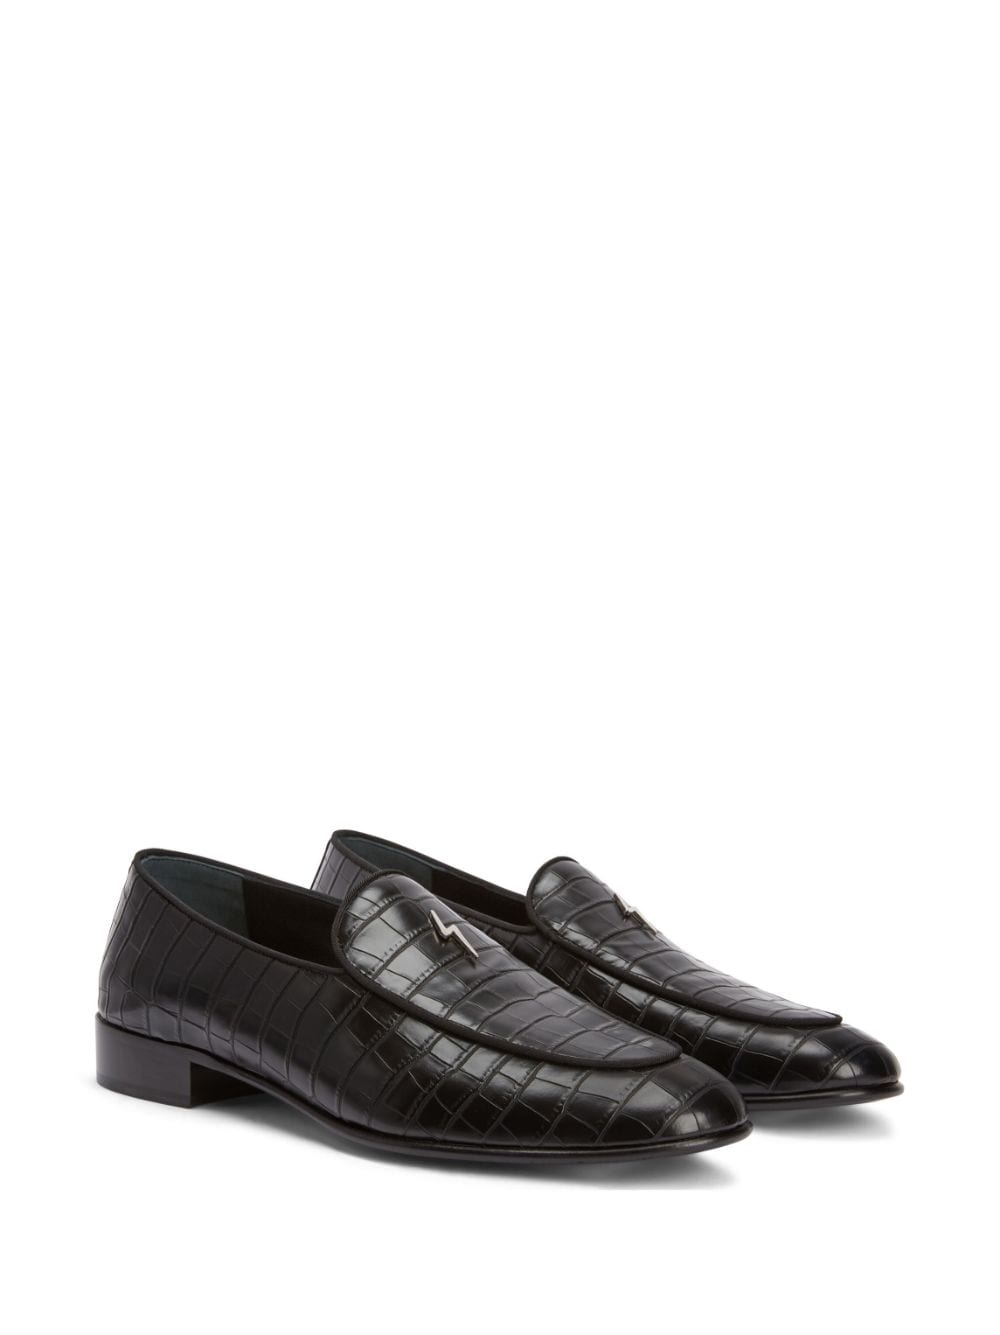 Image 2 of Giuseppe Zanotti Rudolph leather loafers